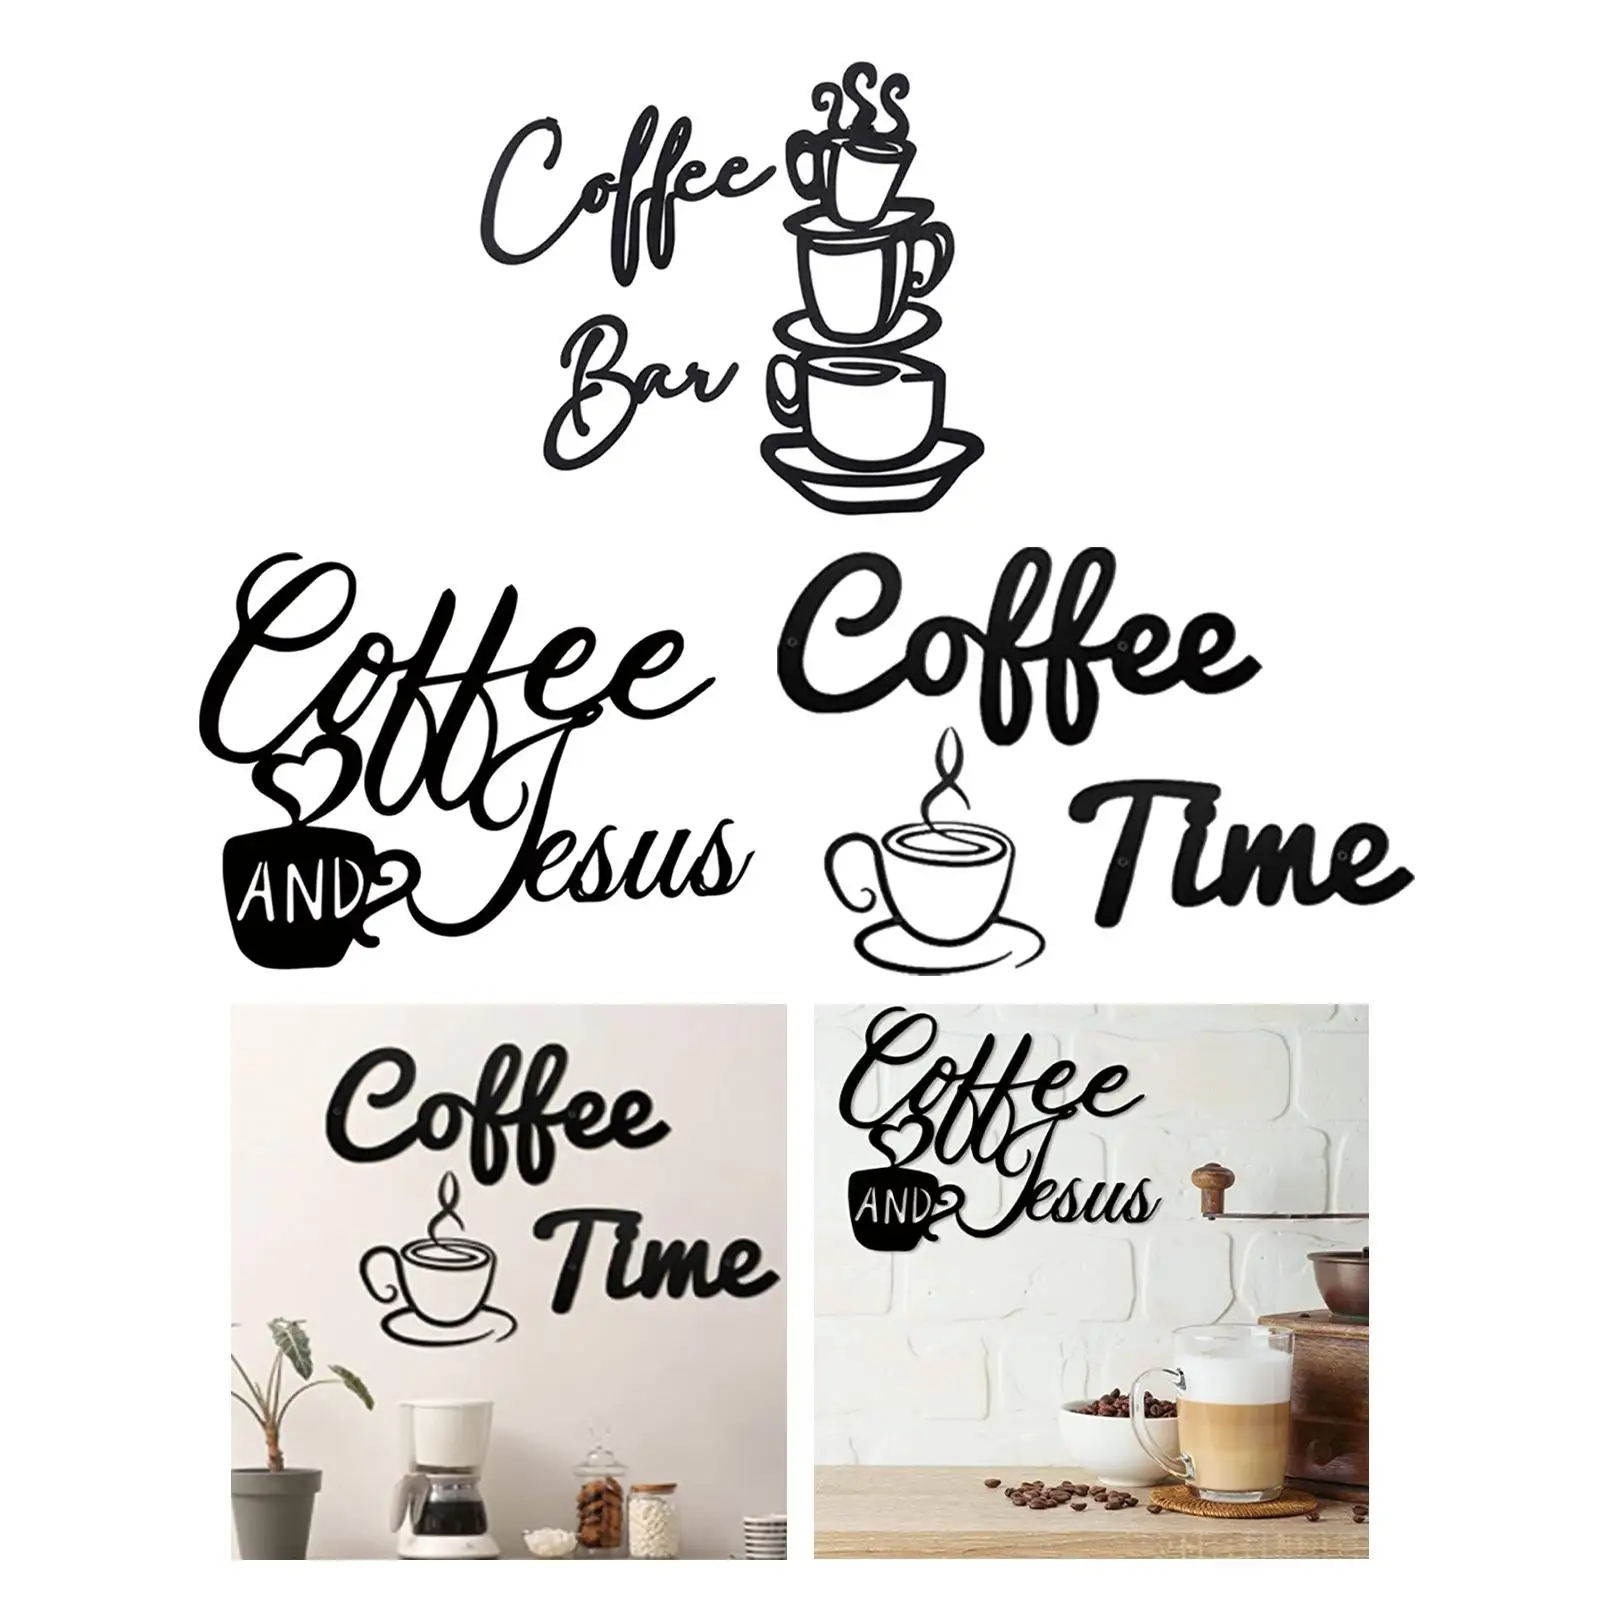 Hanging Wall Art Sign Wall Art Decor Wall Sculptures Kitchen Home Rustic Metal Coffee Sign for Background Bedroom Coffee Station